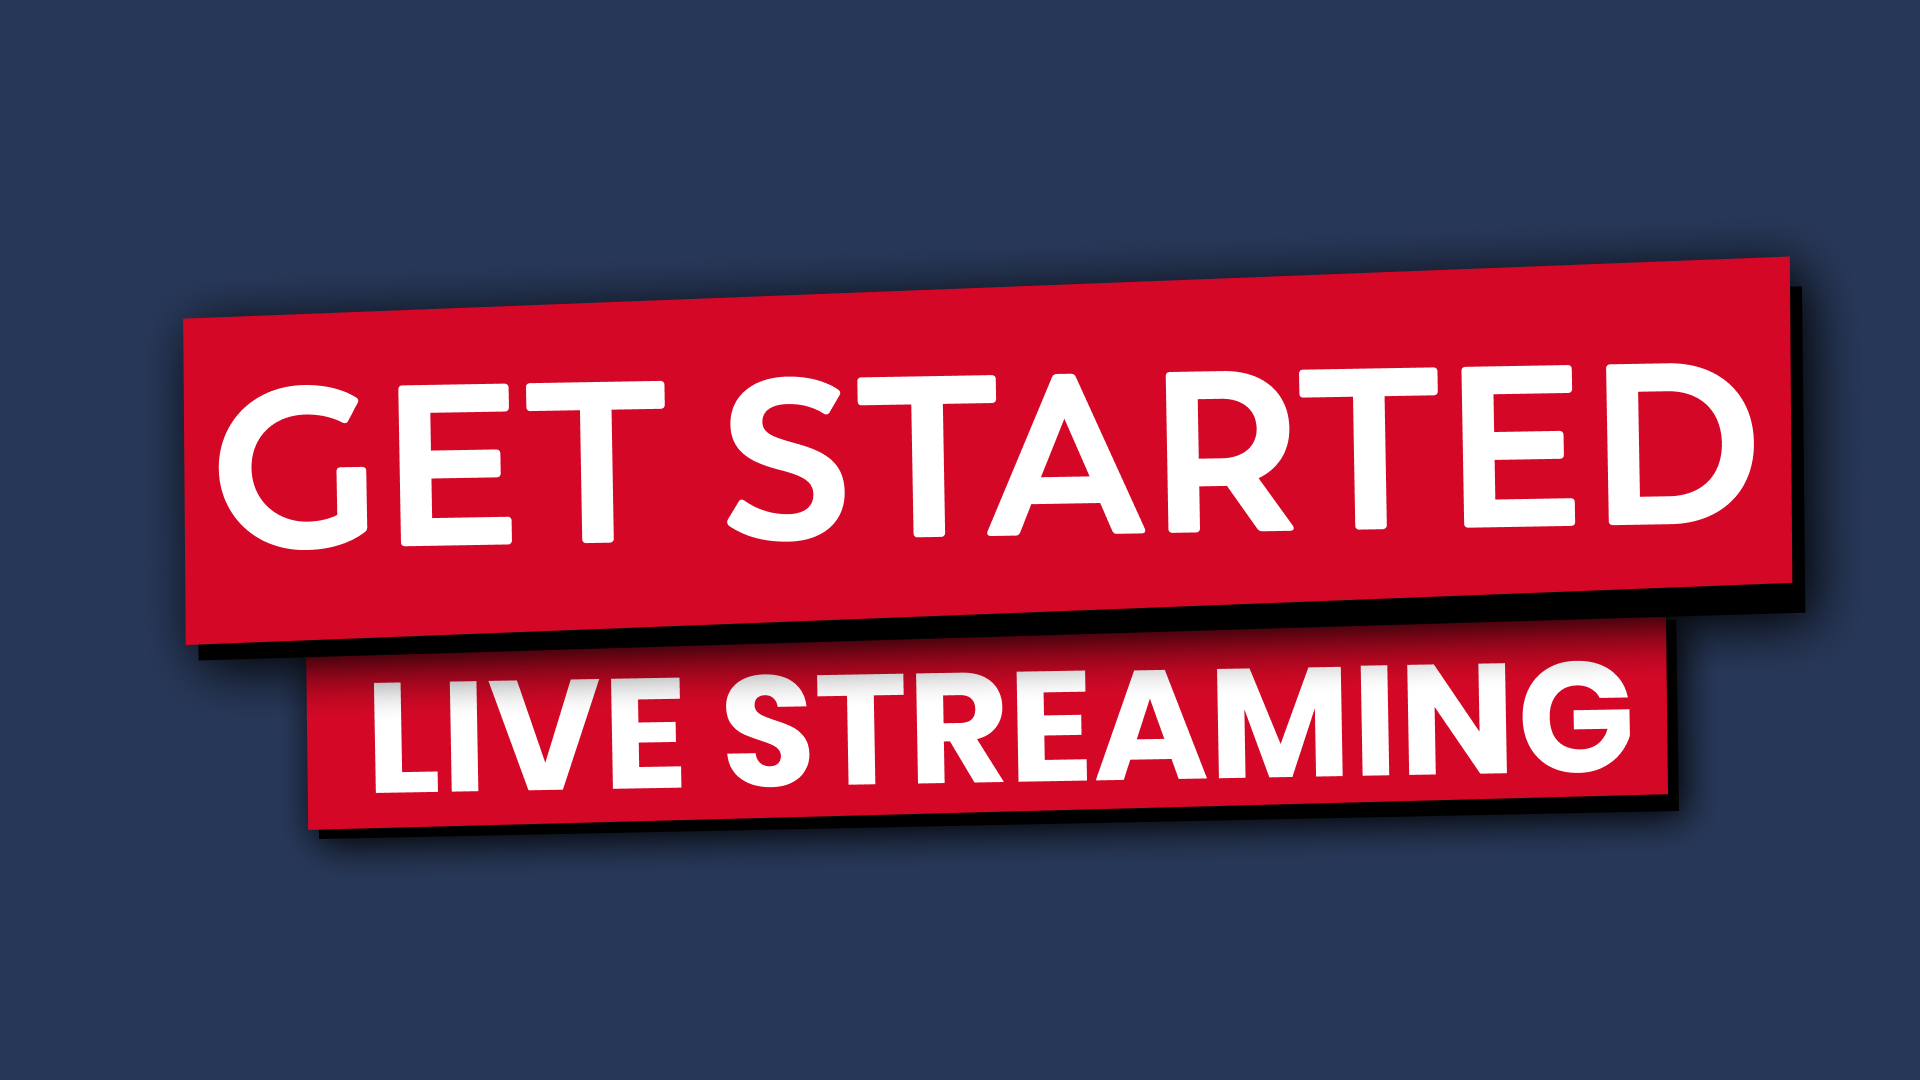 Why and How to Get Started Live Streaming